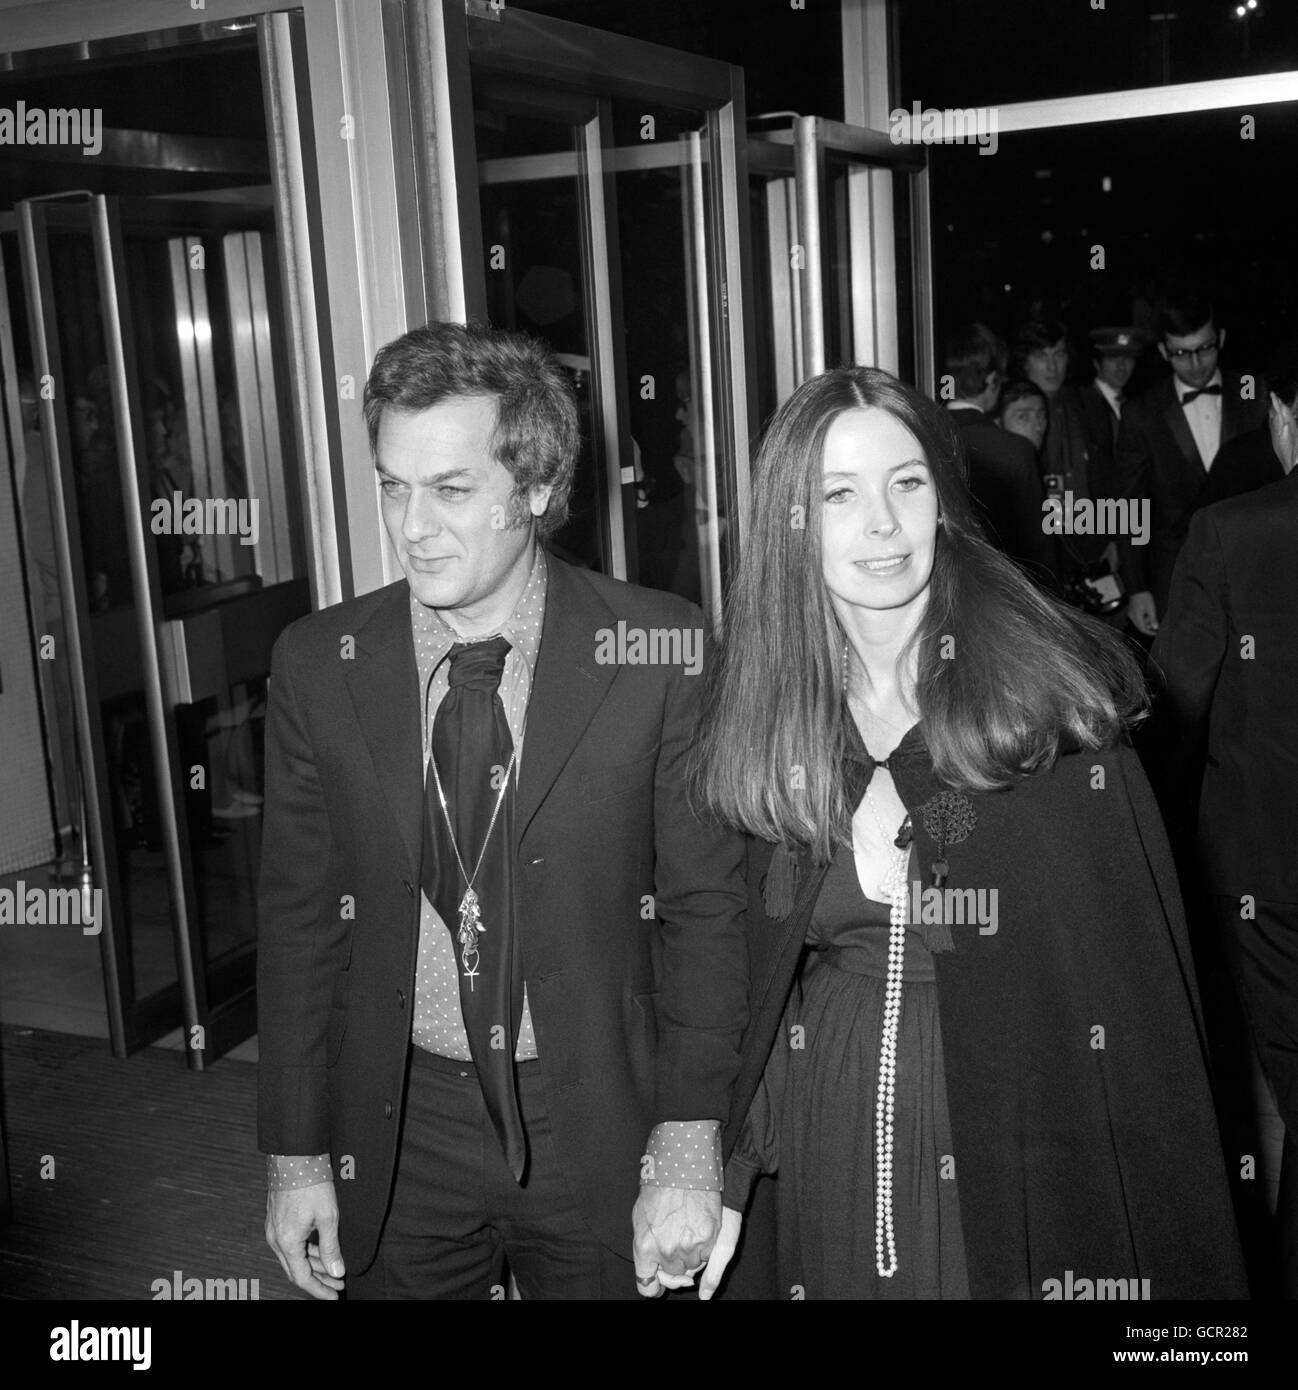 American actor Tony Curtis and his wife Leslie Allen arriving for the premiere of Tora! Tora! Tora!, the film about Pearl Harbour, at Leicester Square Theatre. Stock Photo